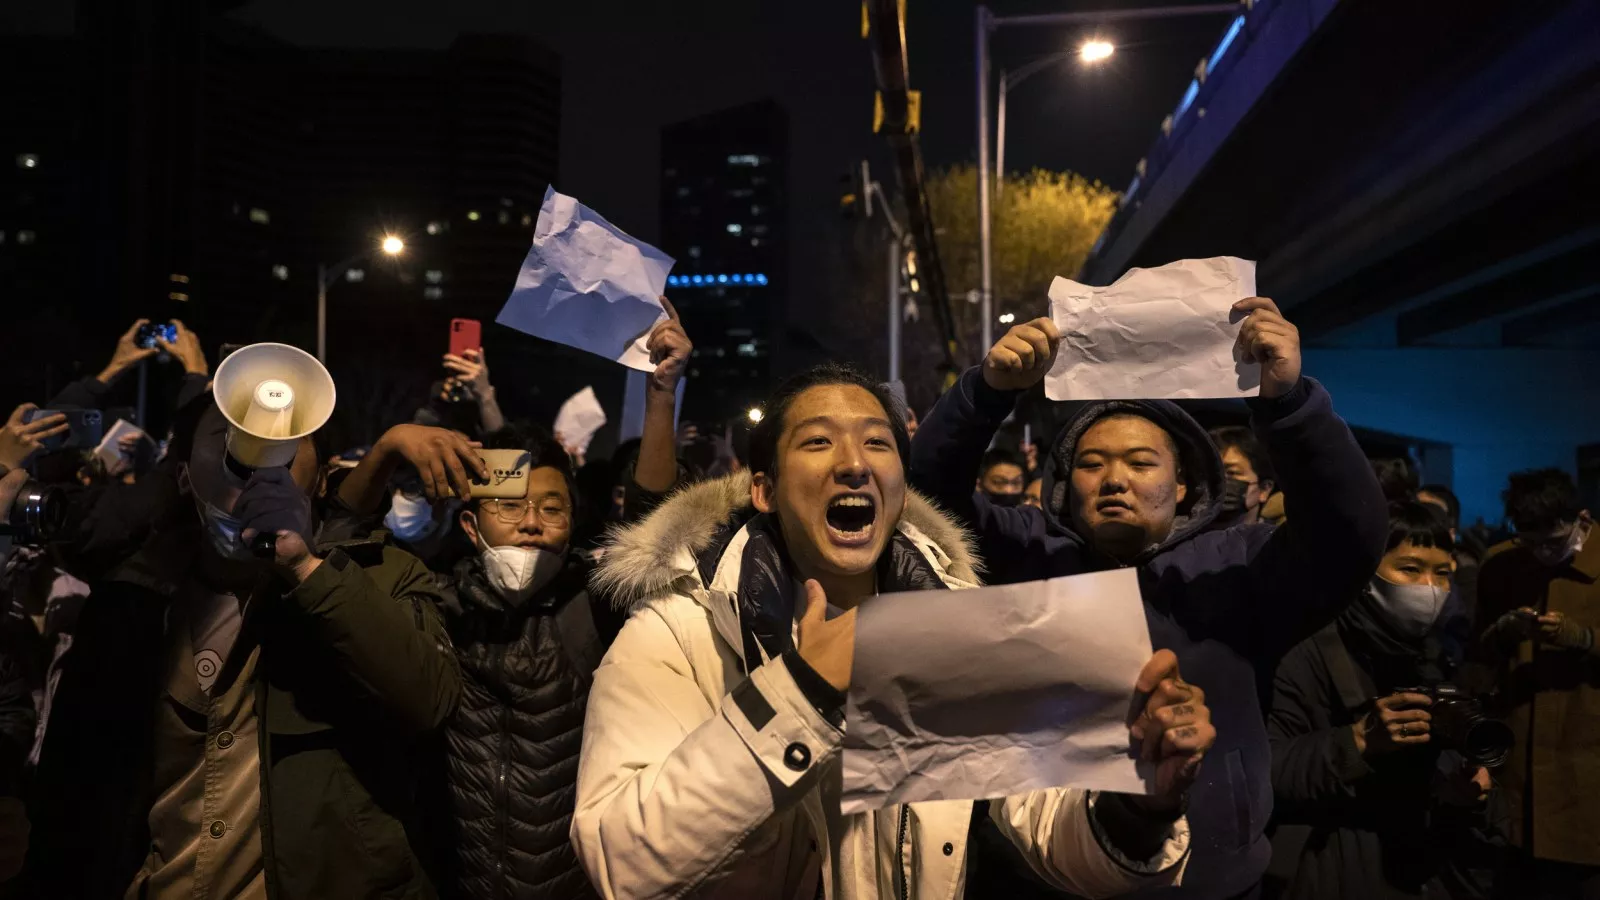 Western Journalists Covering China Protests 'Beaten' and 'Intimidated'